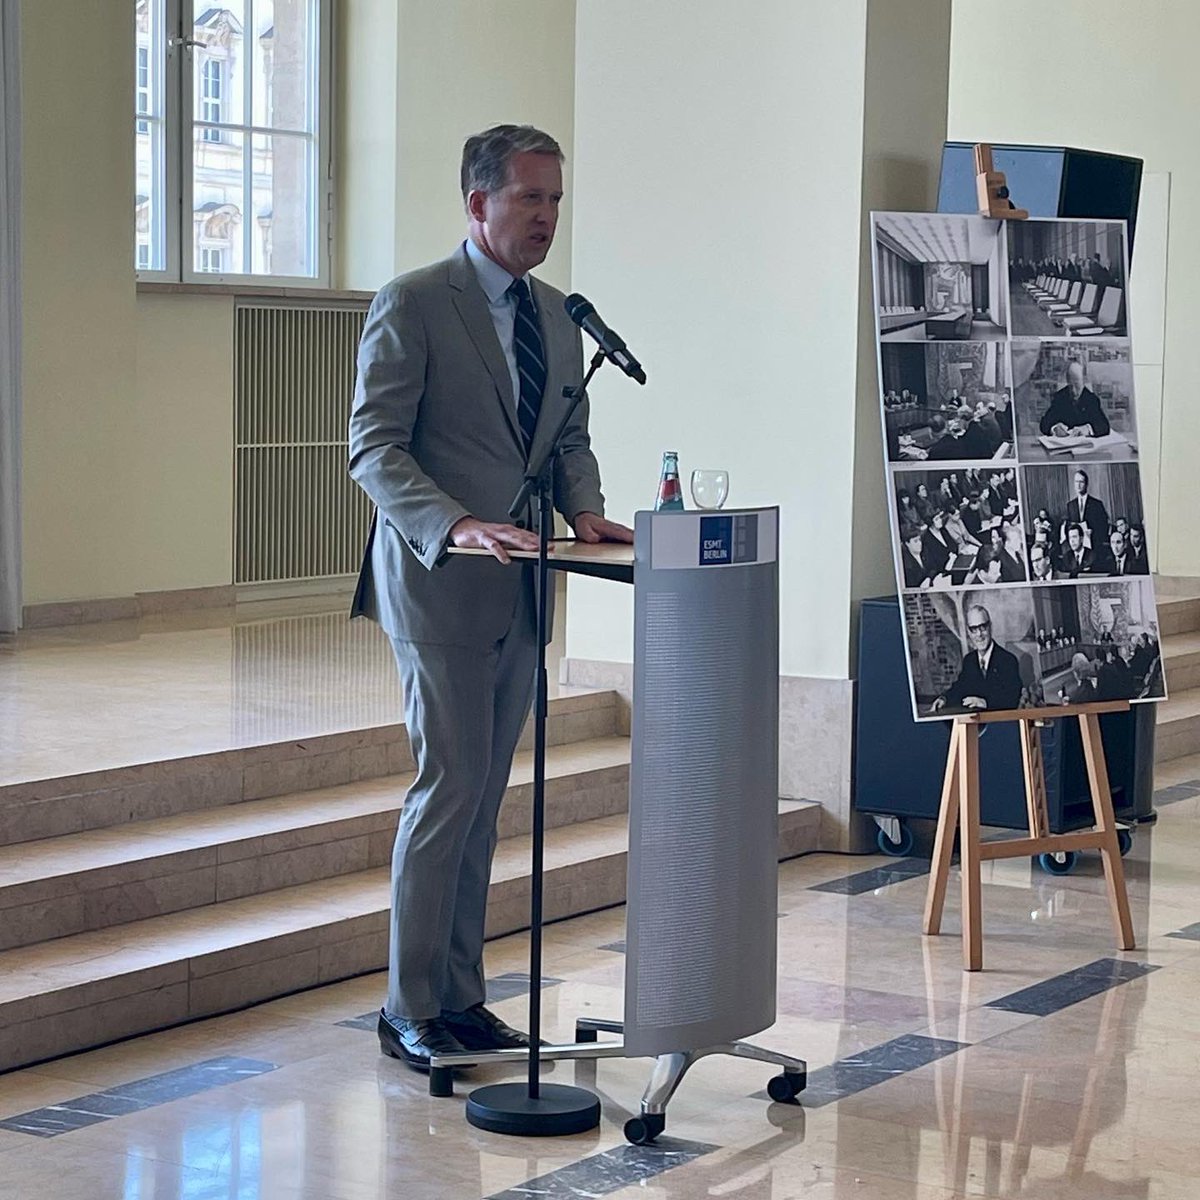 The Bush Foundation is excited to be in Berlin this week celebrating President Bush’s contributions to German reunification. Today, we joined @esmtberlin to dedicate the President George H.W. Bush Reunification Suite, which will soon become a place for entrepreneurial education.